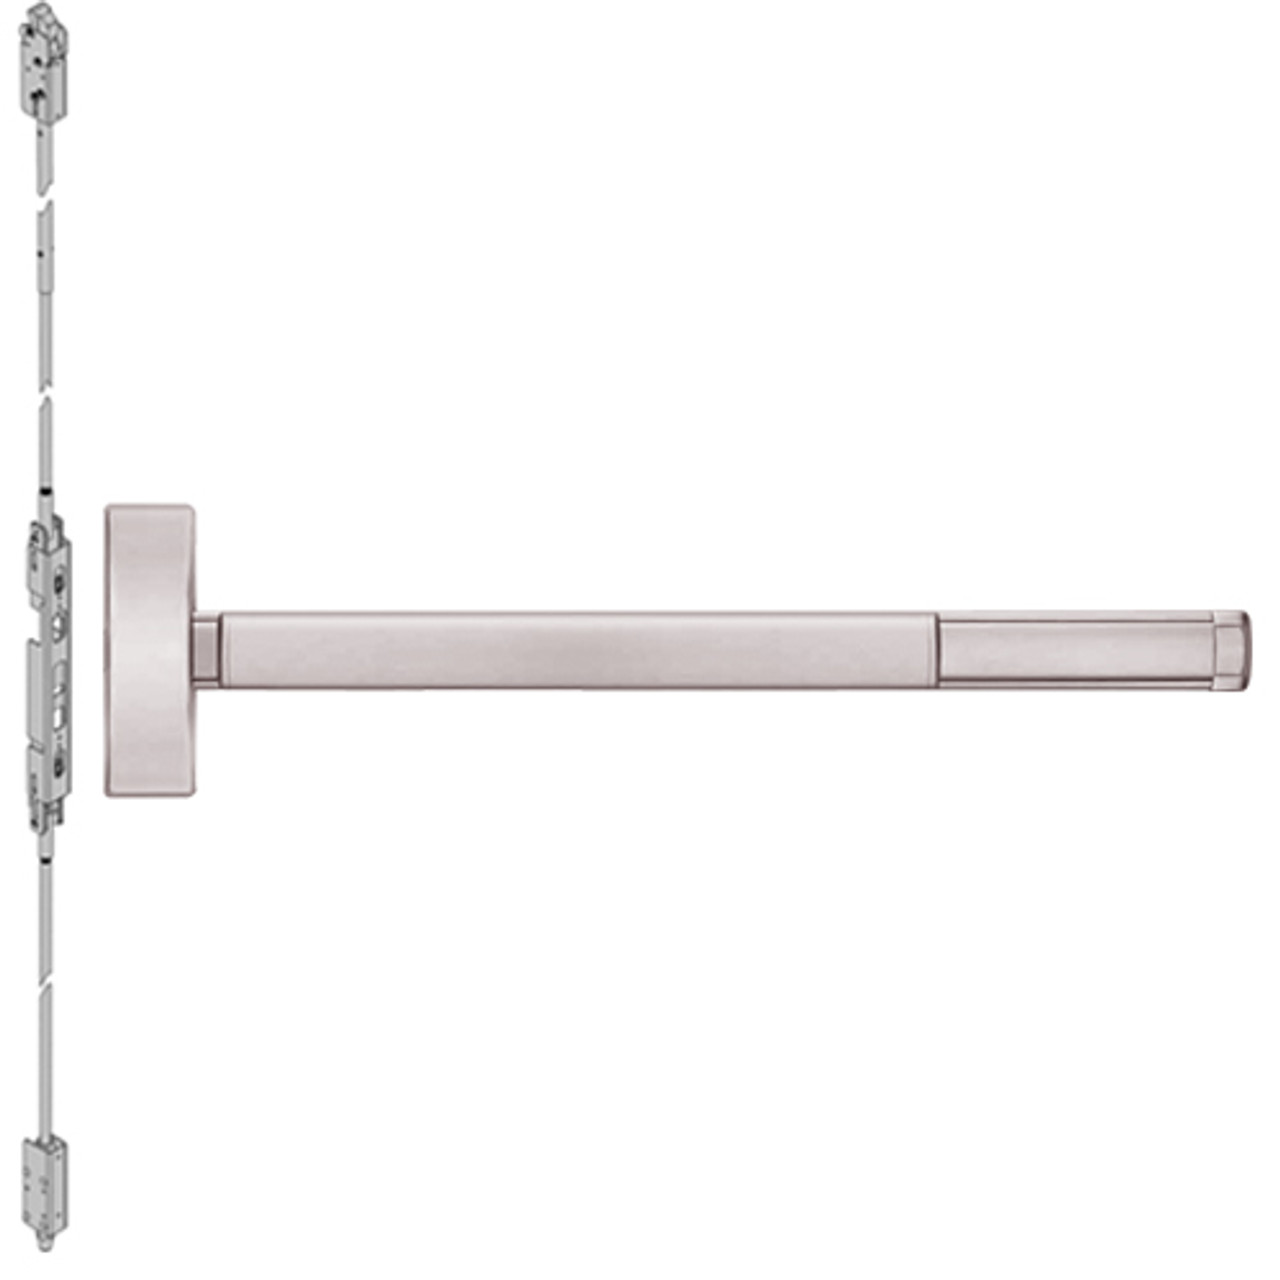 MLR2815-628-48 PHI 2800 Series Concealed Vertical Rod Exit Device with Motorized Latch Retraction Prepped for Thumbpiece Always Active in Satin Aluminum Finish